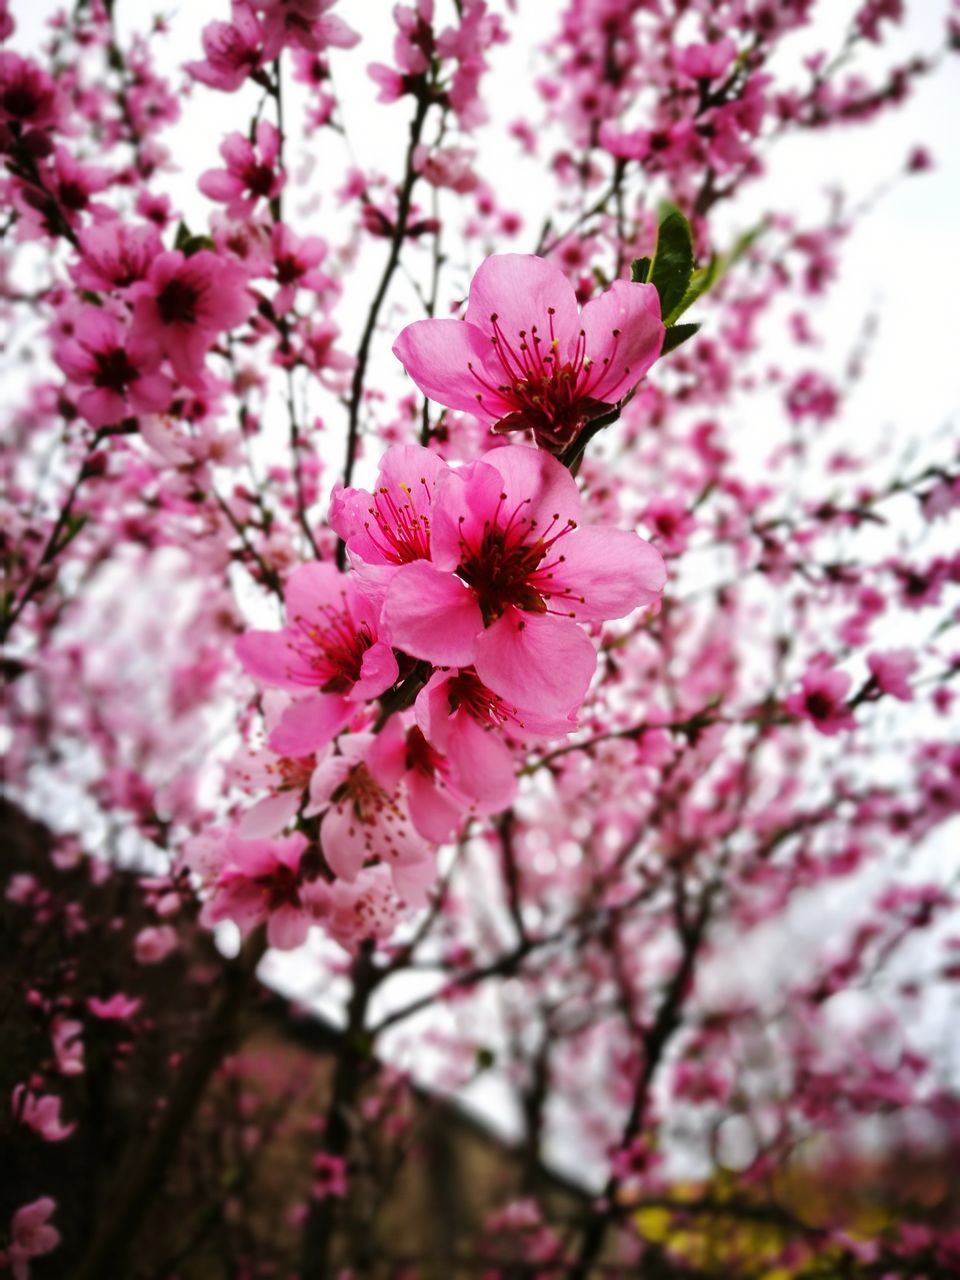 flower, fragility, blossom, pink color, cherry blossom, beauty in nature, petal, growth, freshness, nature, springtime, tree, flower head, cherry tree, botany, branch, no people, pollen, blooming, stamen, pink, day, plum blossom, outdoors, close-up